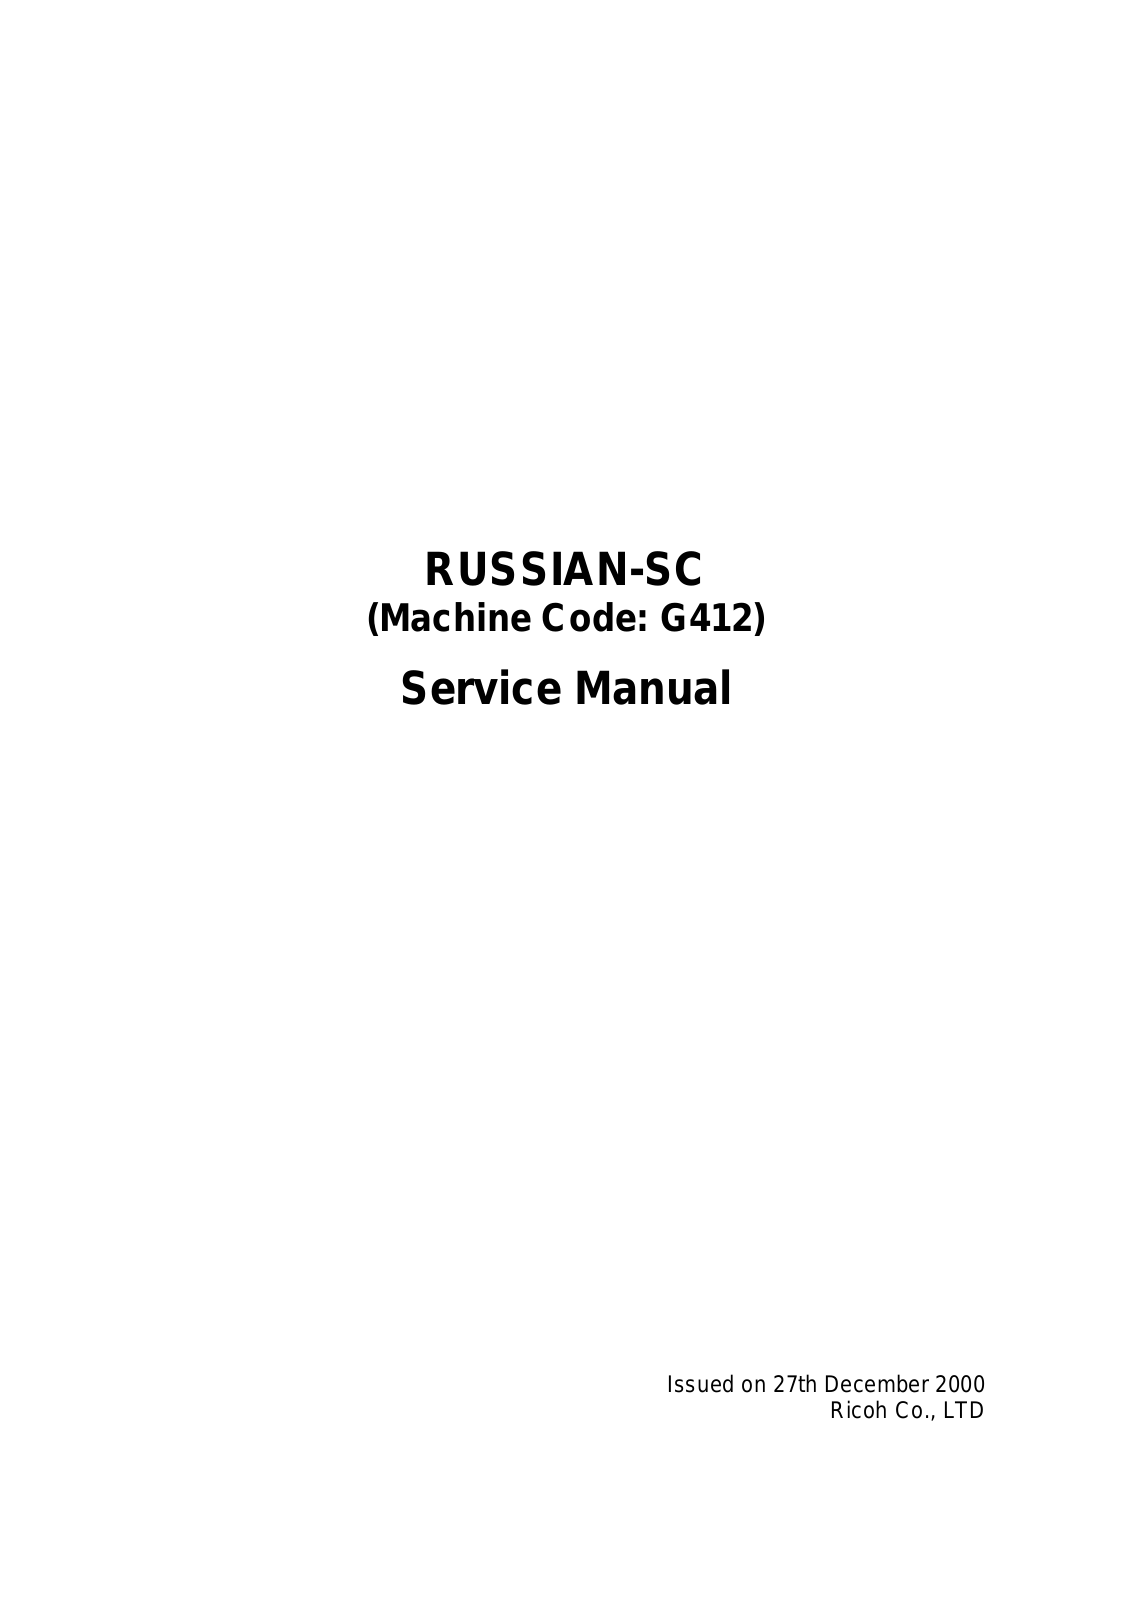 Ricoh is330dc Service Manual